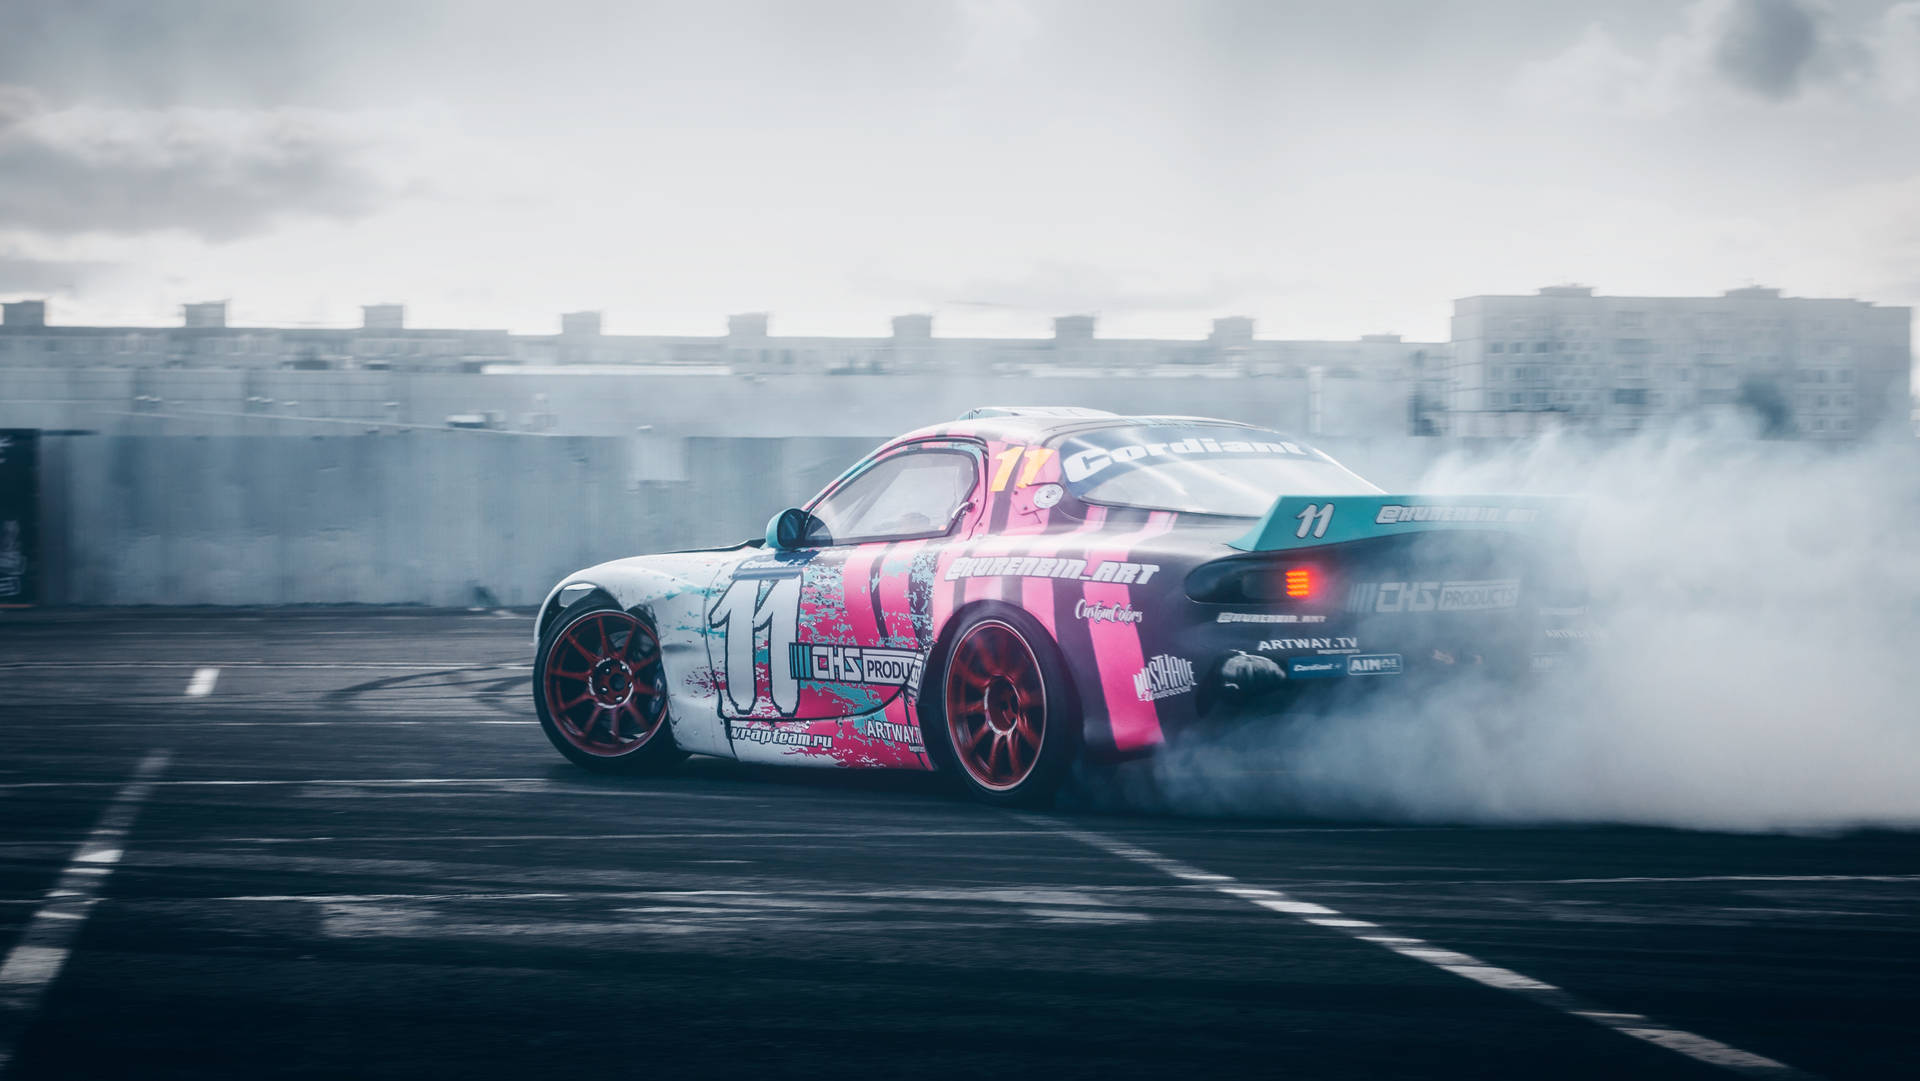 Colorful Racing Rx7 Car